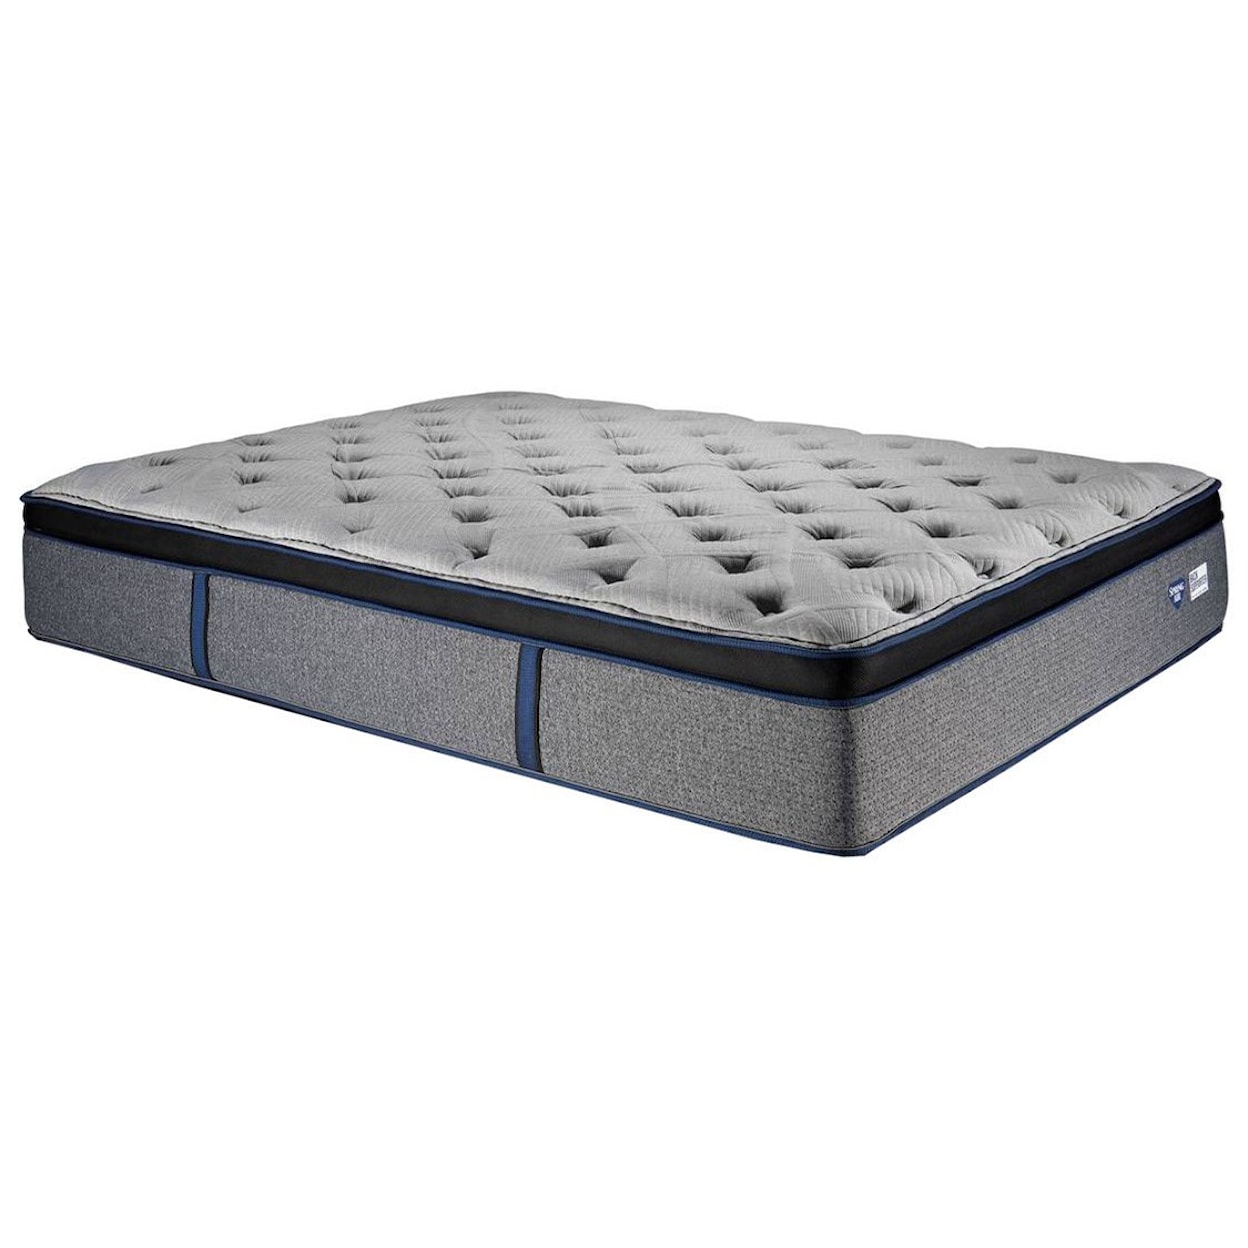 Spring Air Calypso ET Full Pocketed Coil Mattress